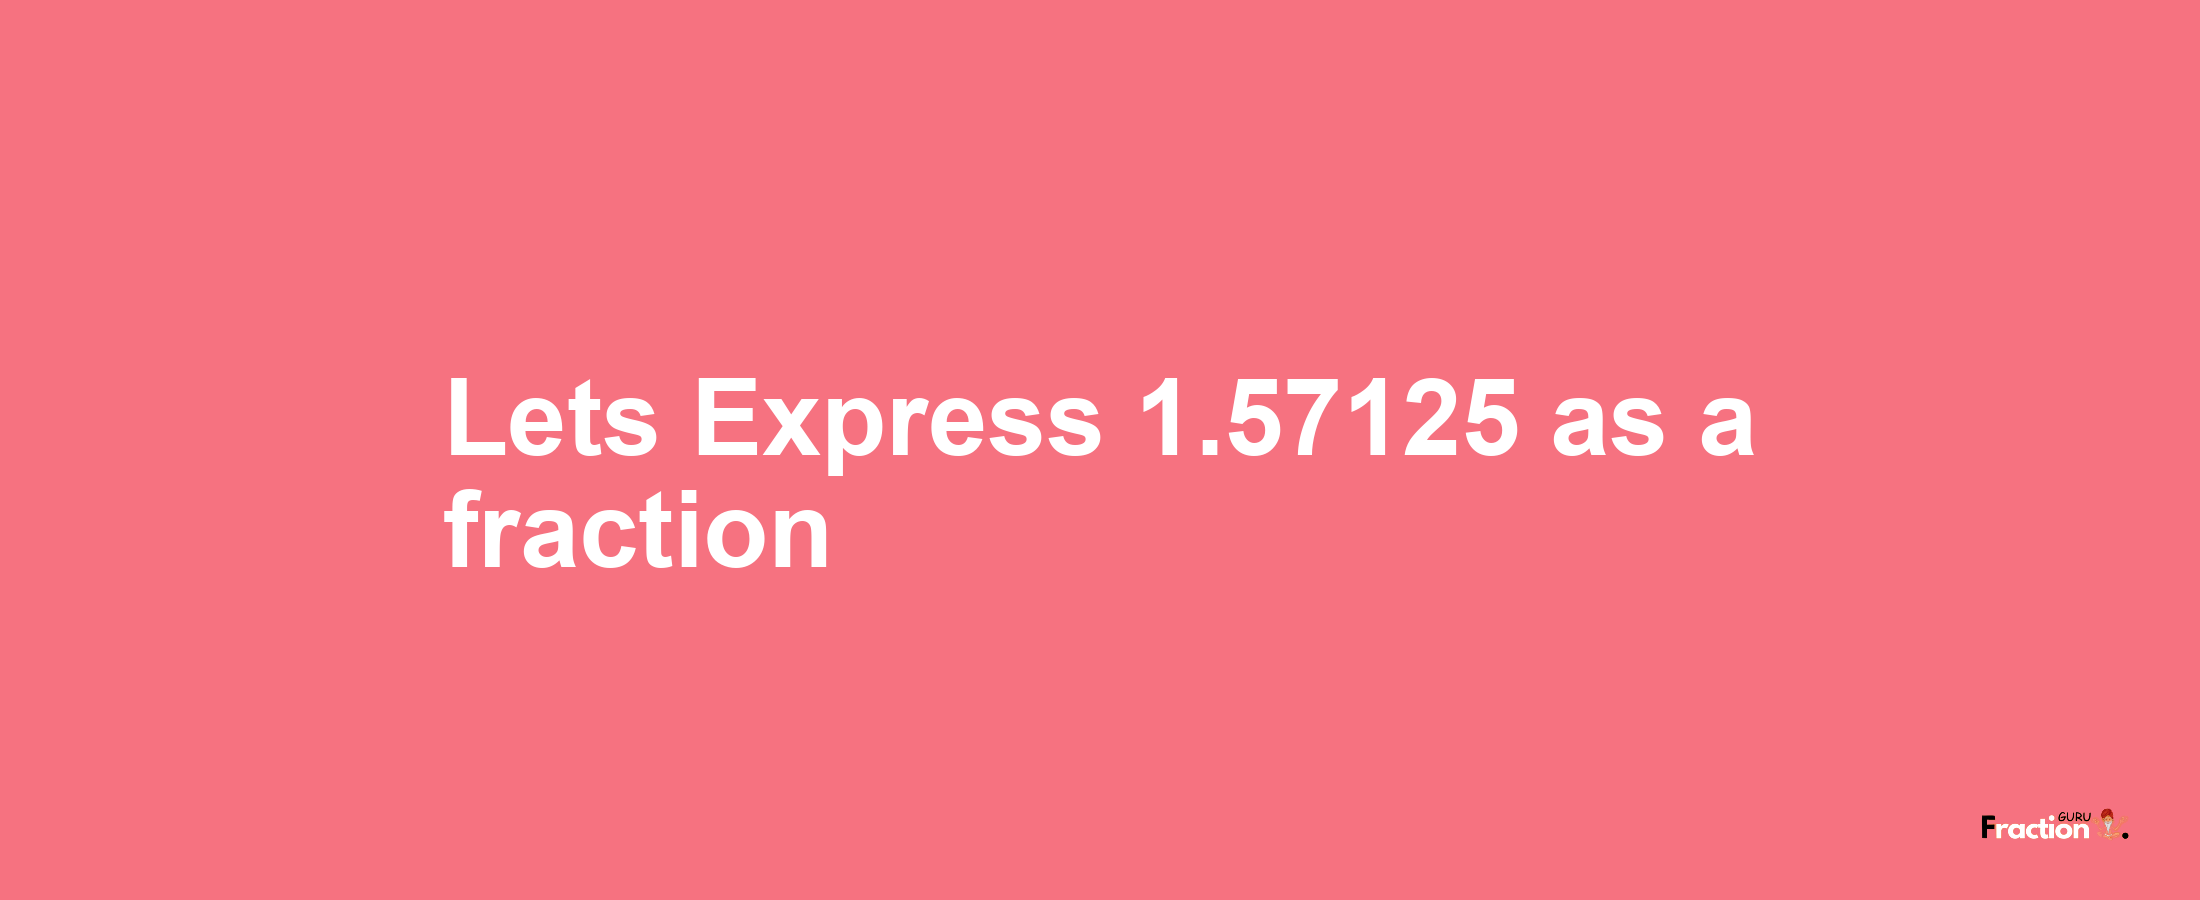 Lets Express 1.57125 as afraction